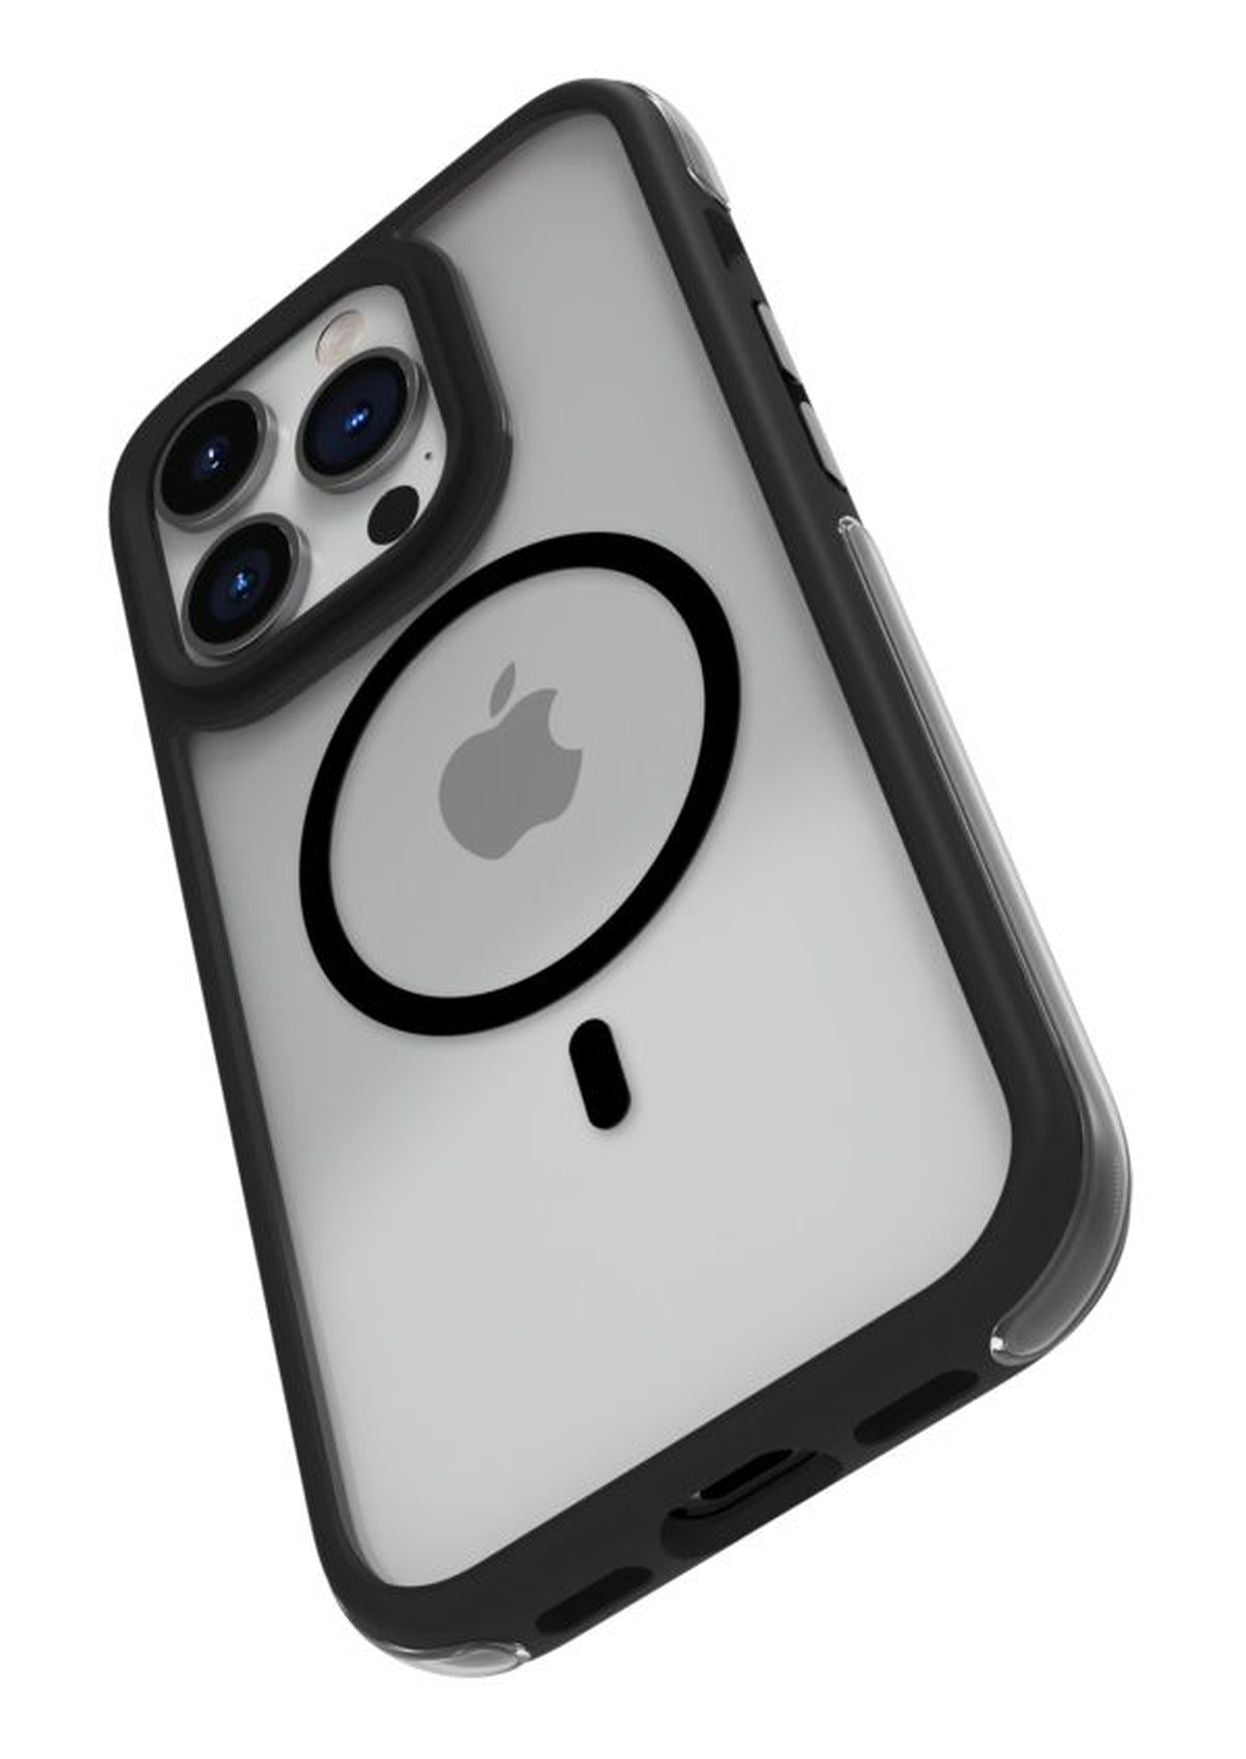 An iPhone 15 Pro Max in a Raptic black protective case with military spec drop protection, viewed from the back, showing its triple-camera system and Apple logo.